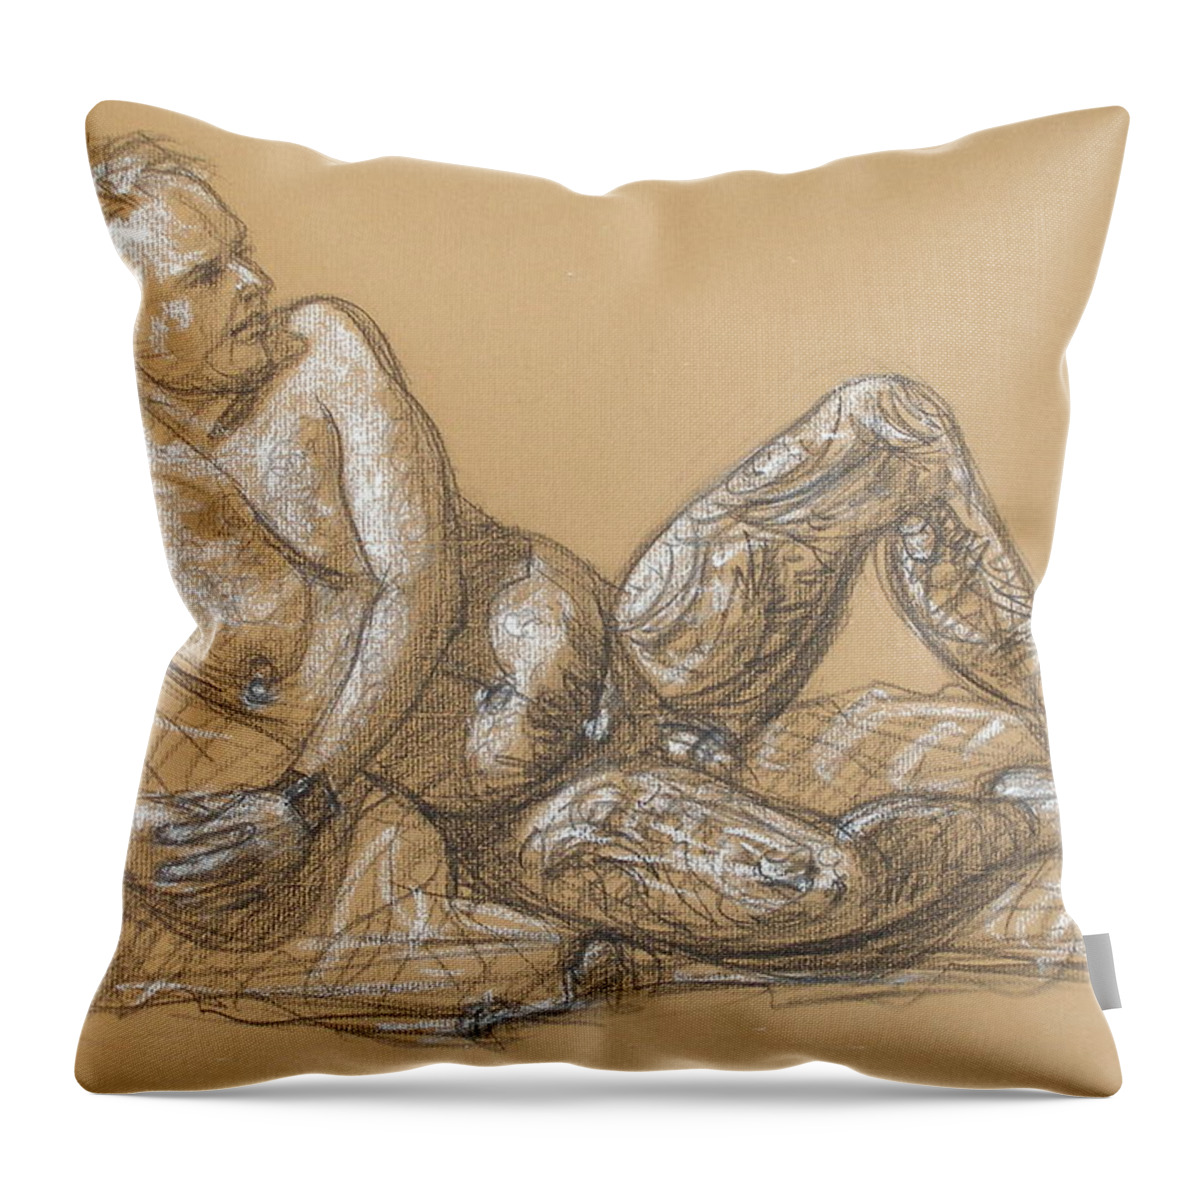 Realism Throw Pillow featuring the drawing Nick Reclining by Donelli DiMaria